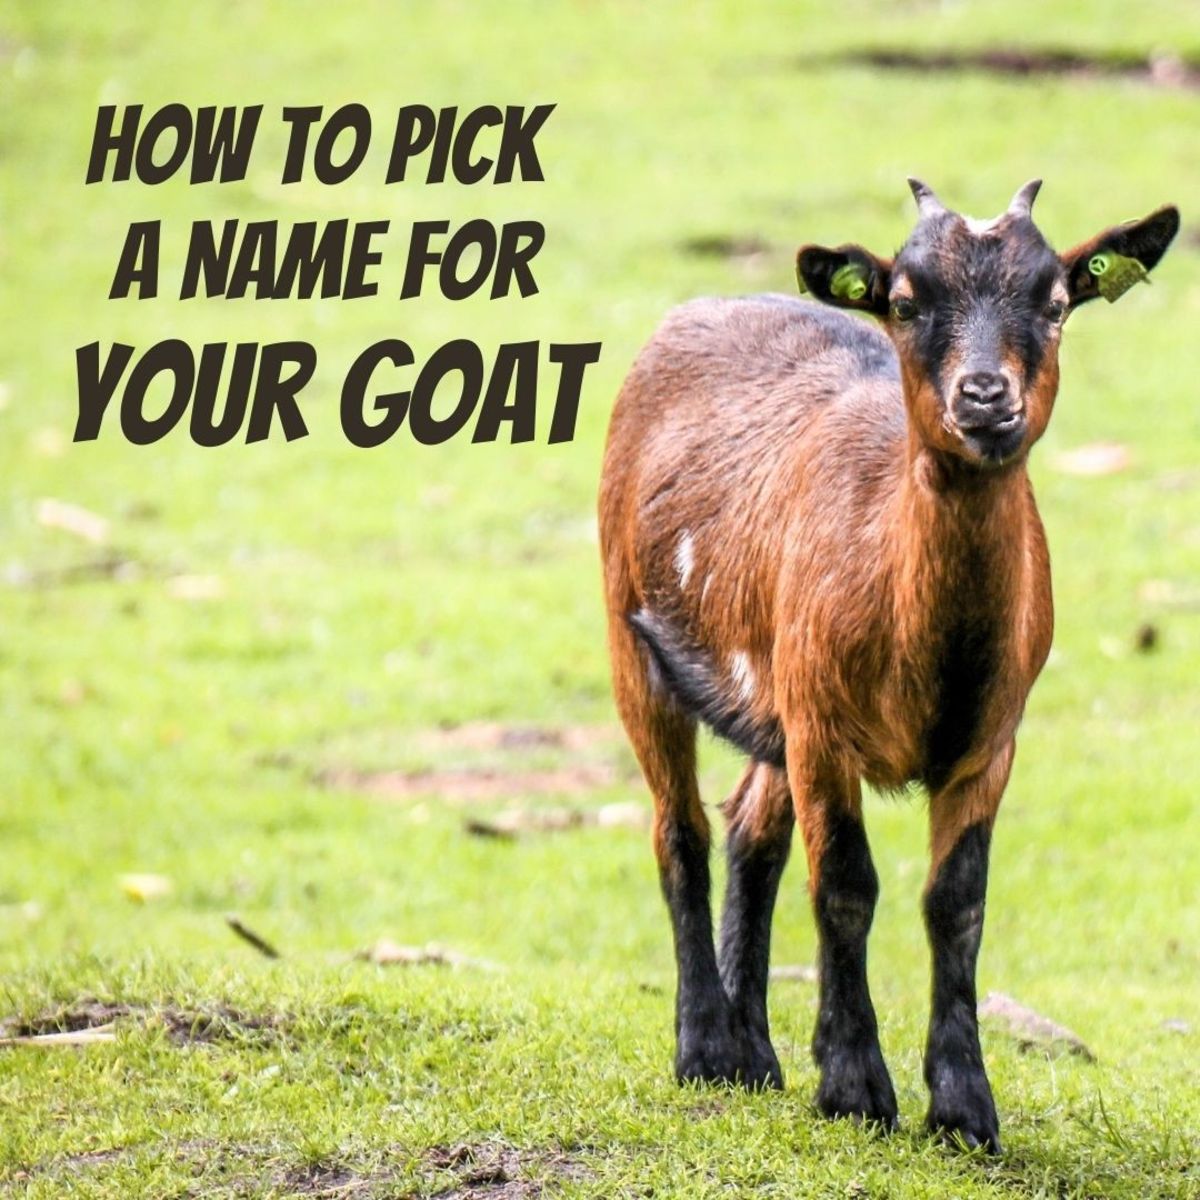 What's the best name for your goat?